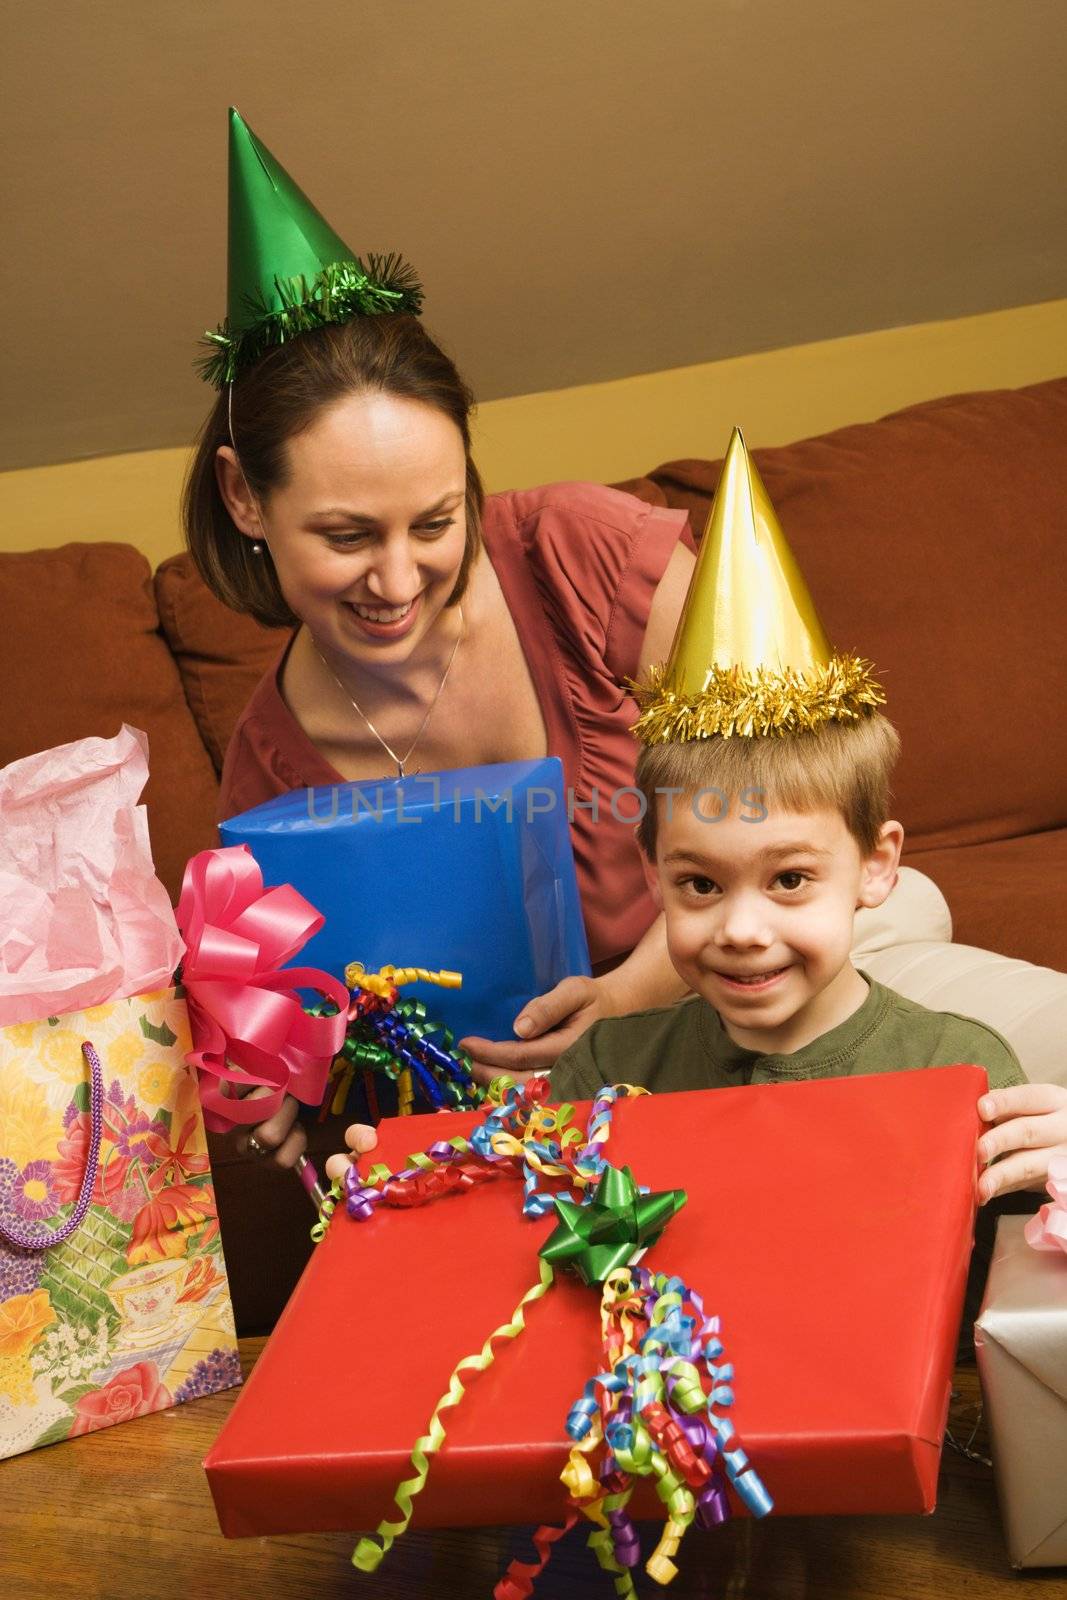 Caucasian mother and son celebrating a birthday party.